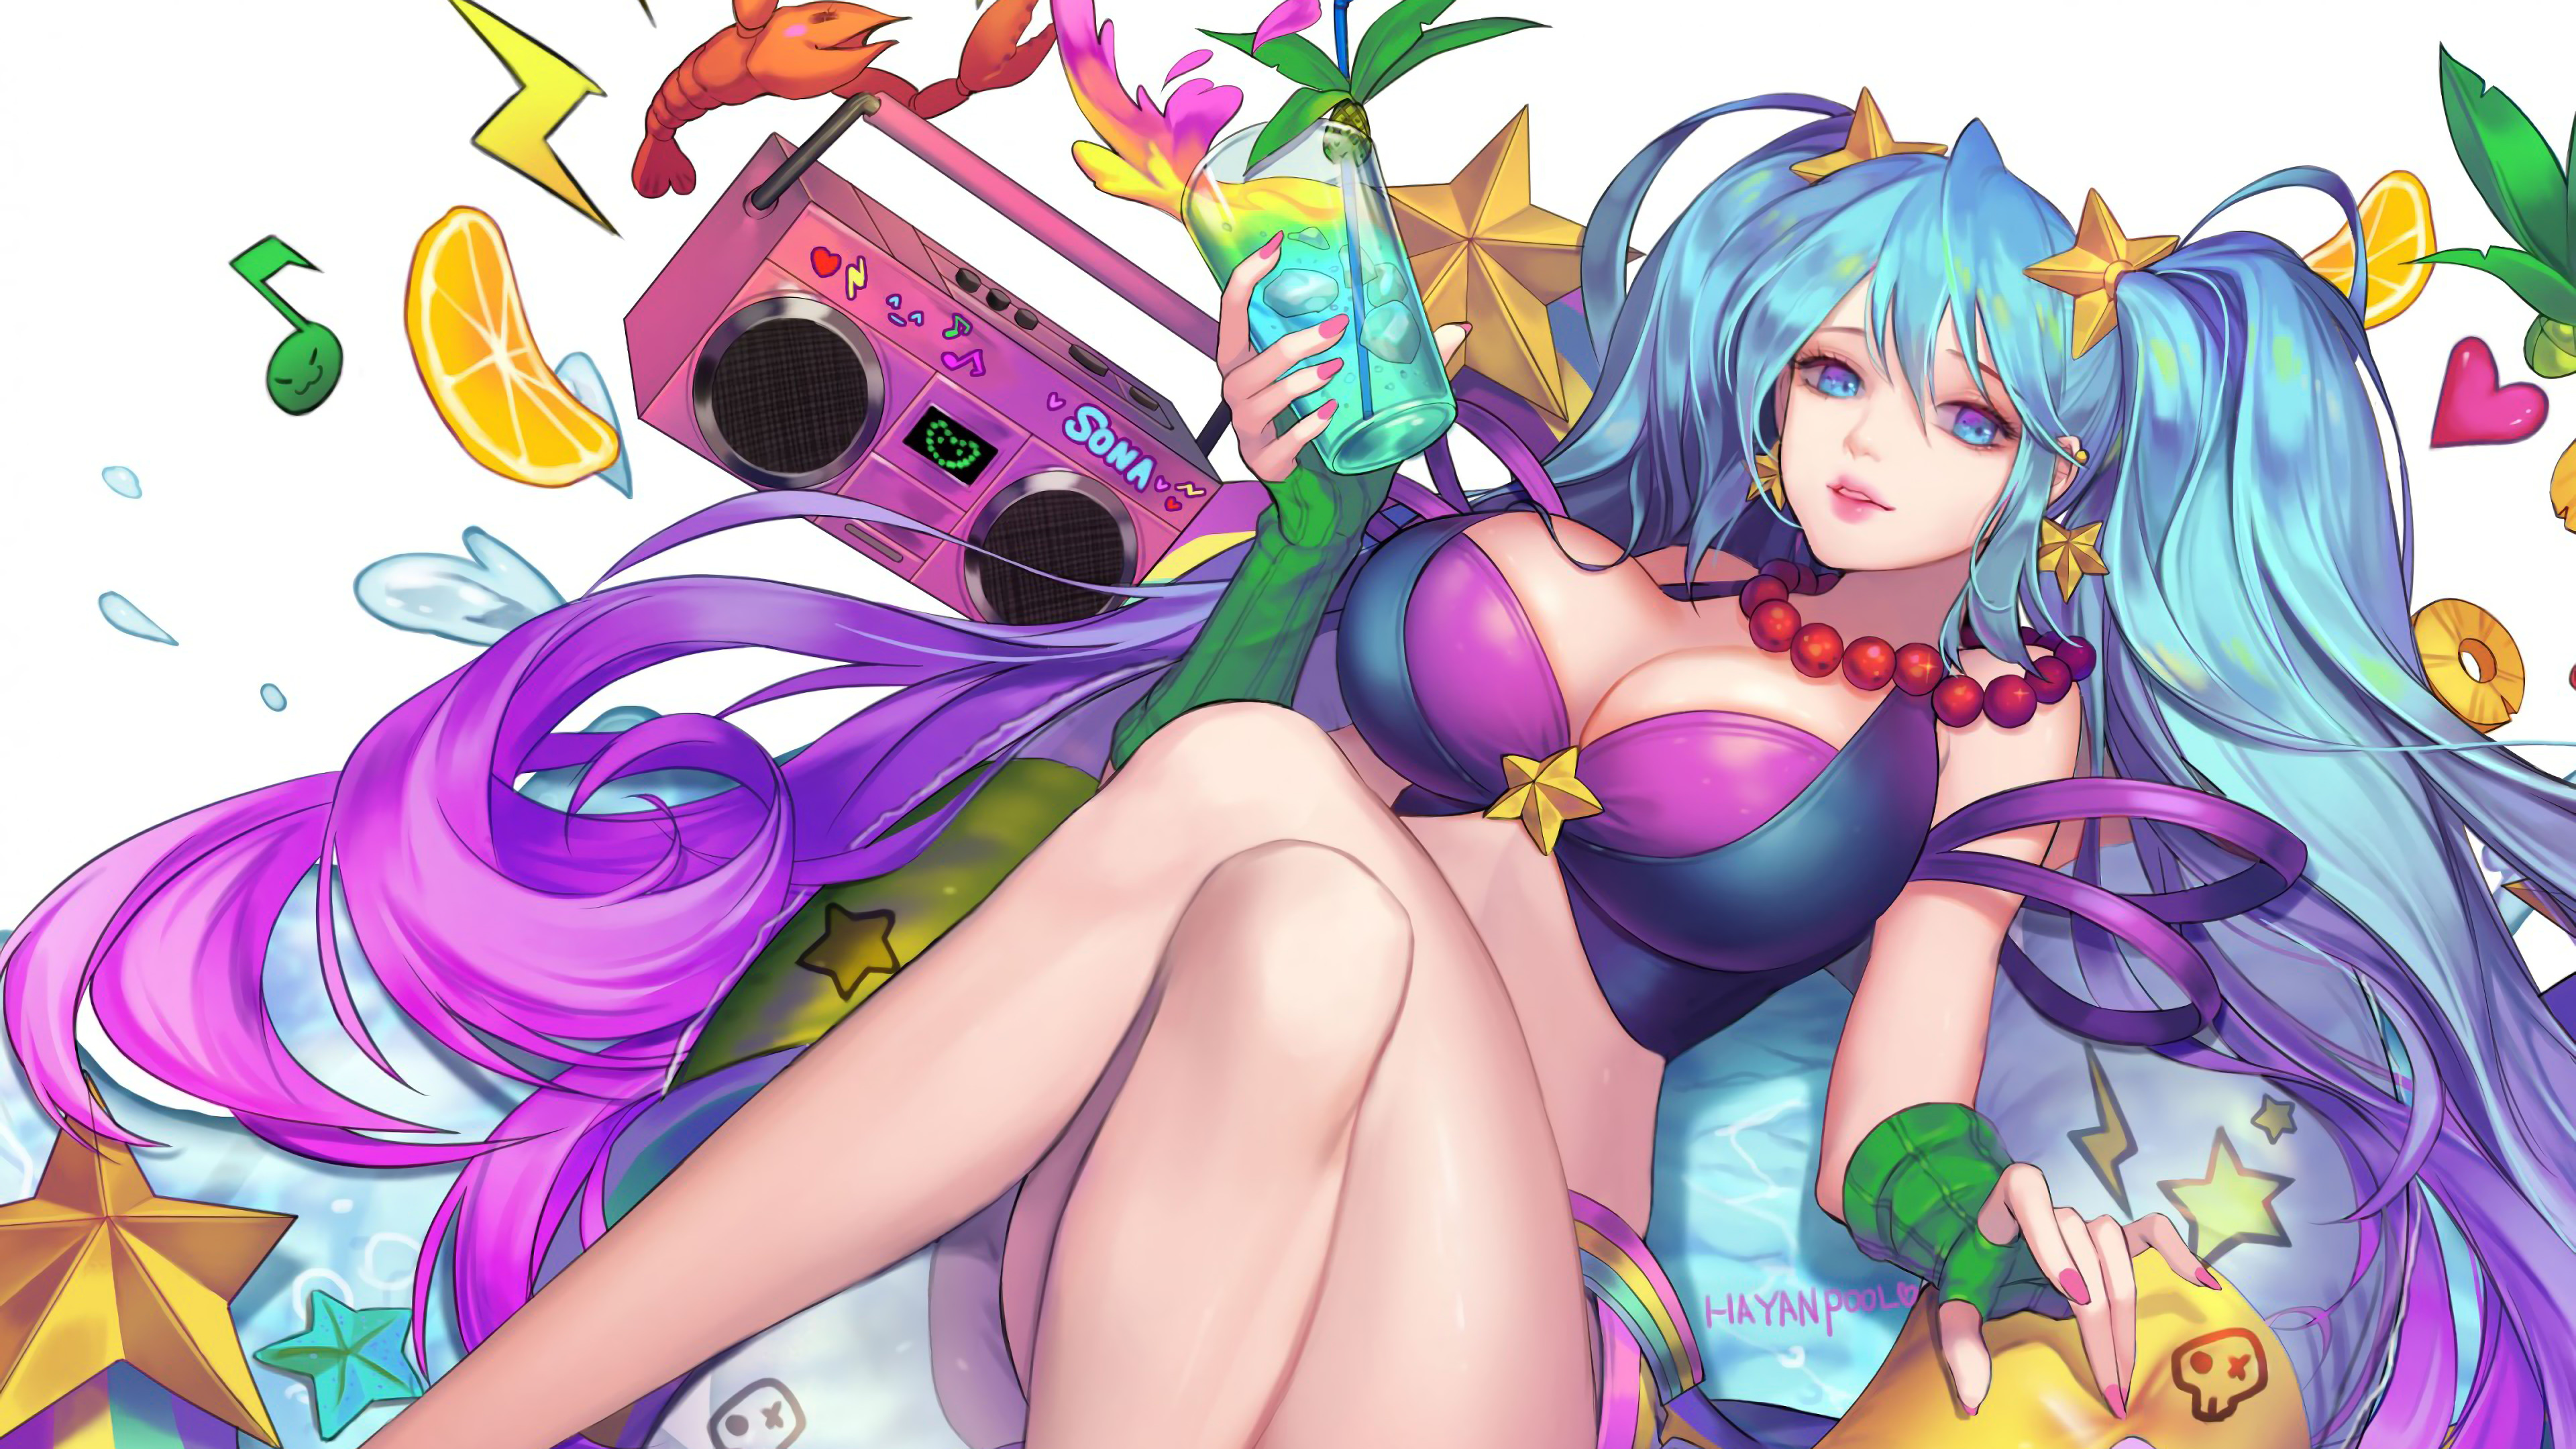 Big Boobs Sona League Of Legends Multi Colored Hair Music Drink League Of Legends Video 